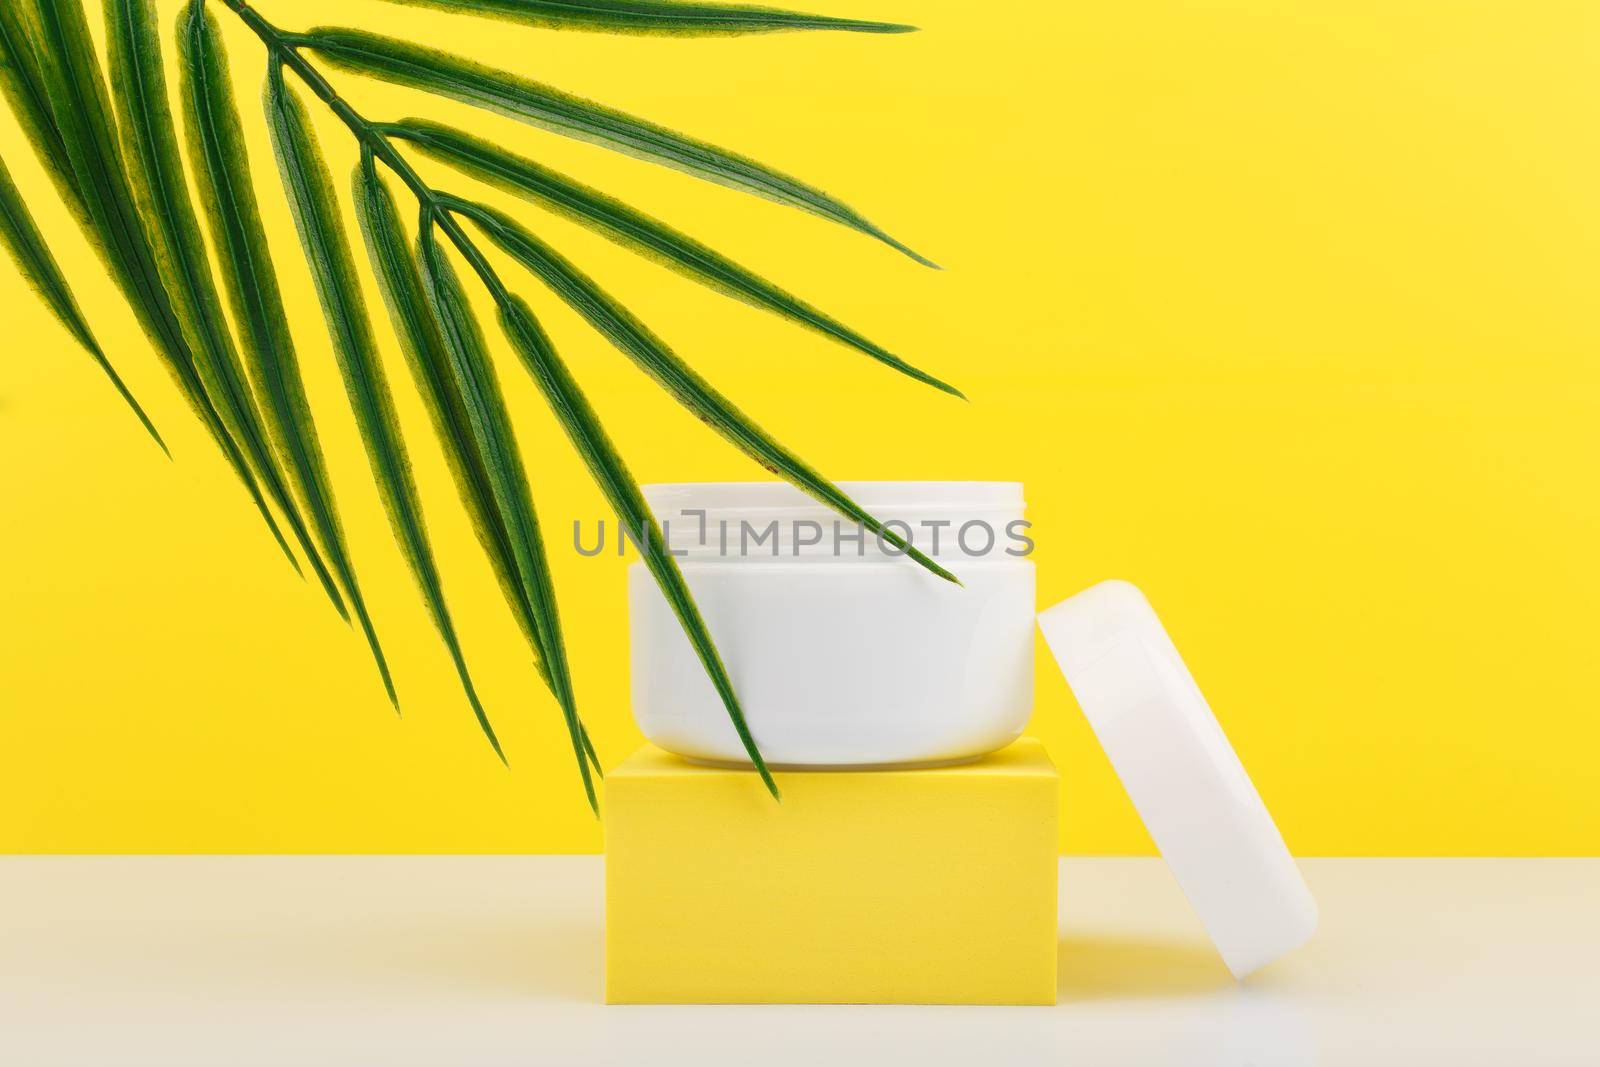 White opened cosmetic jar on yellow podium with palm leaf against bright yellow background. Plastic cosmetic jar for face mask, cream, scrub or balm